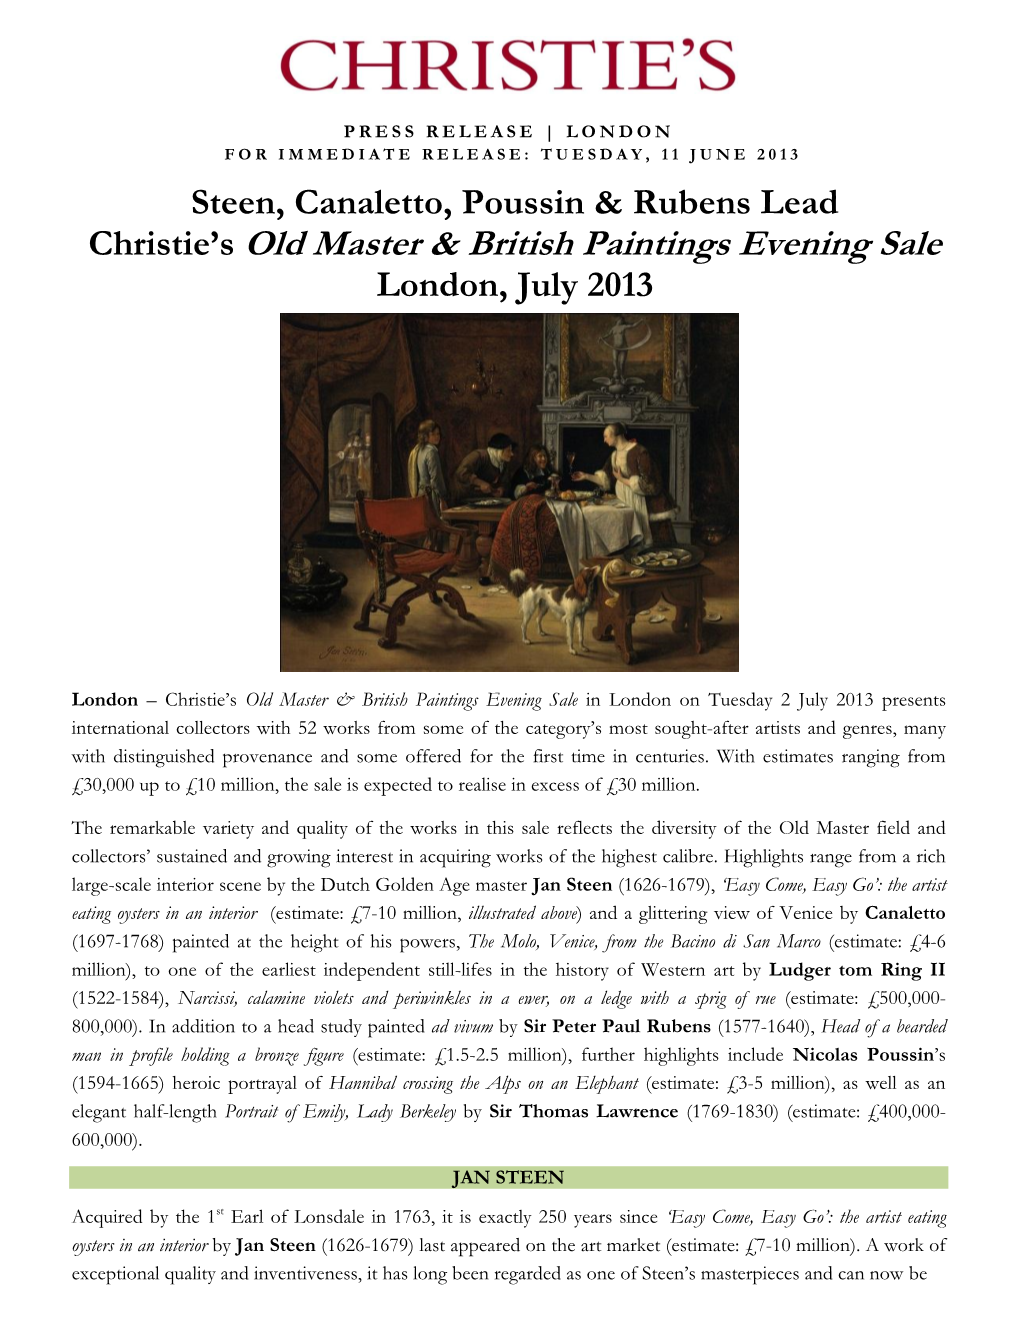 Christie's Old Master & British Paintings Evening Sale